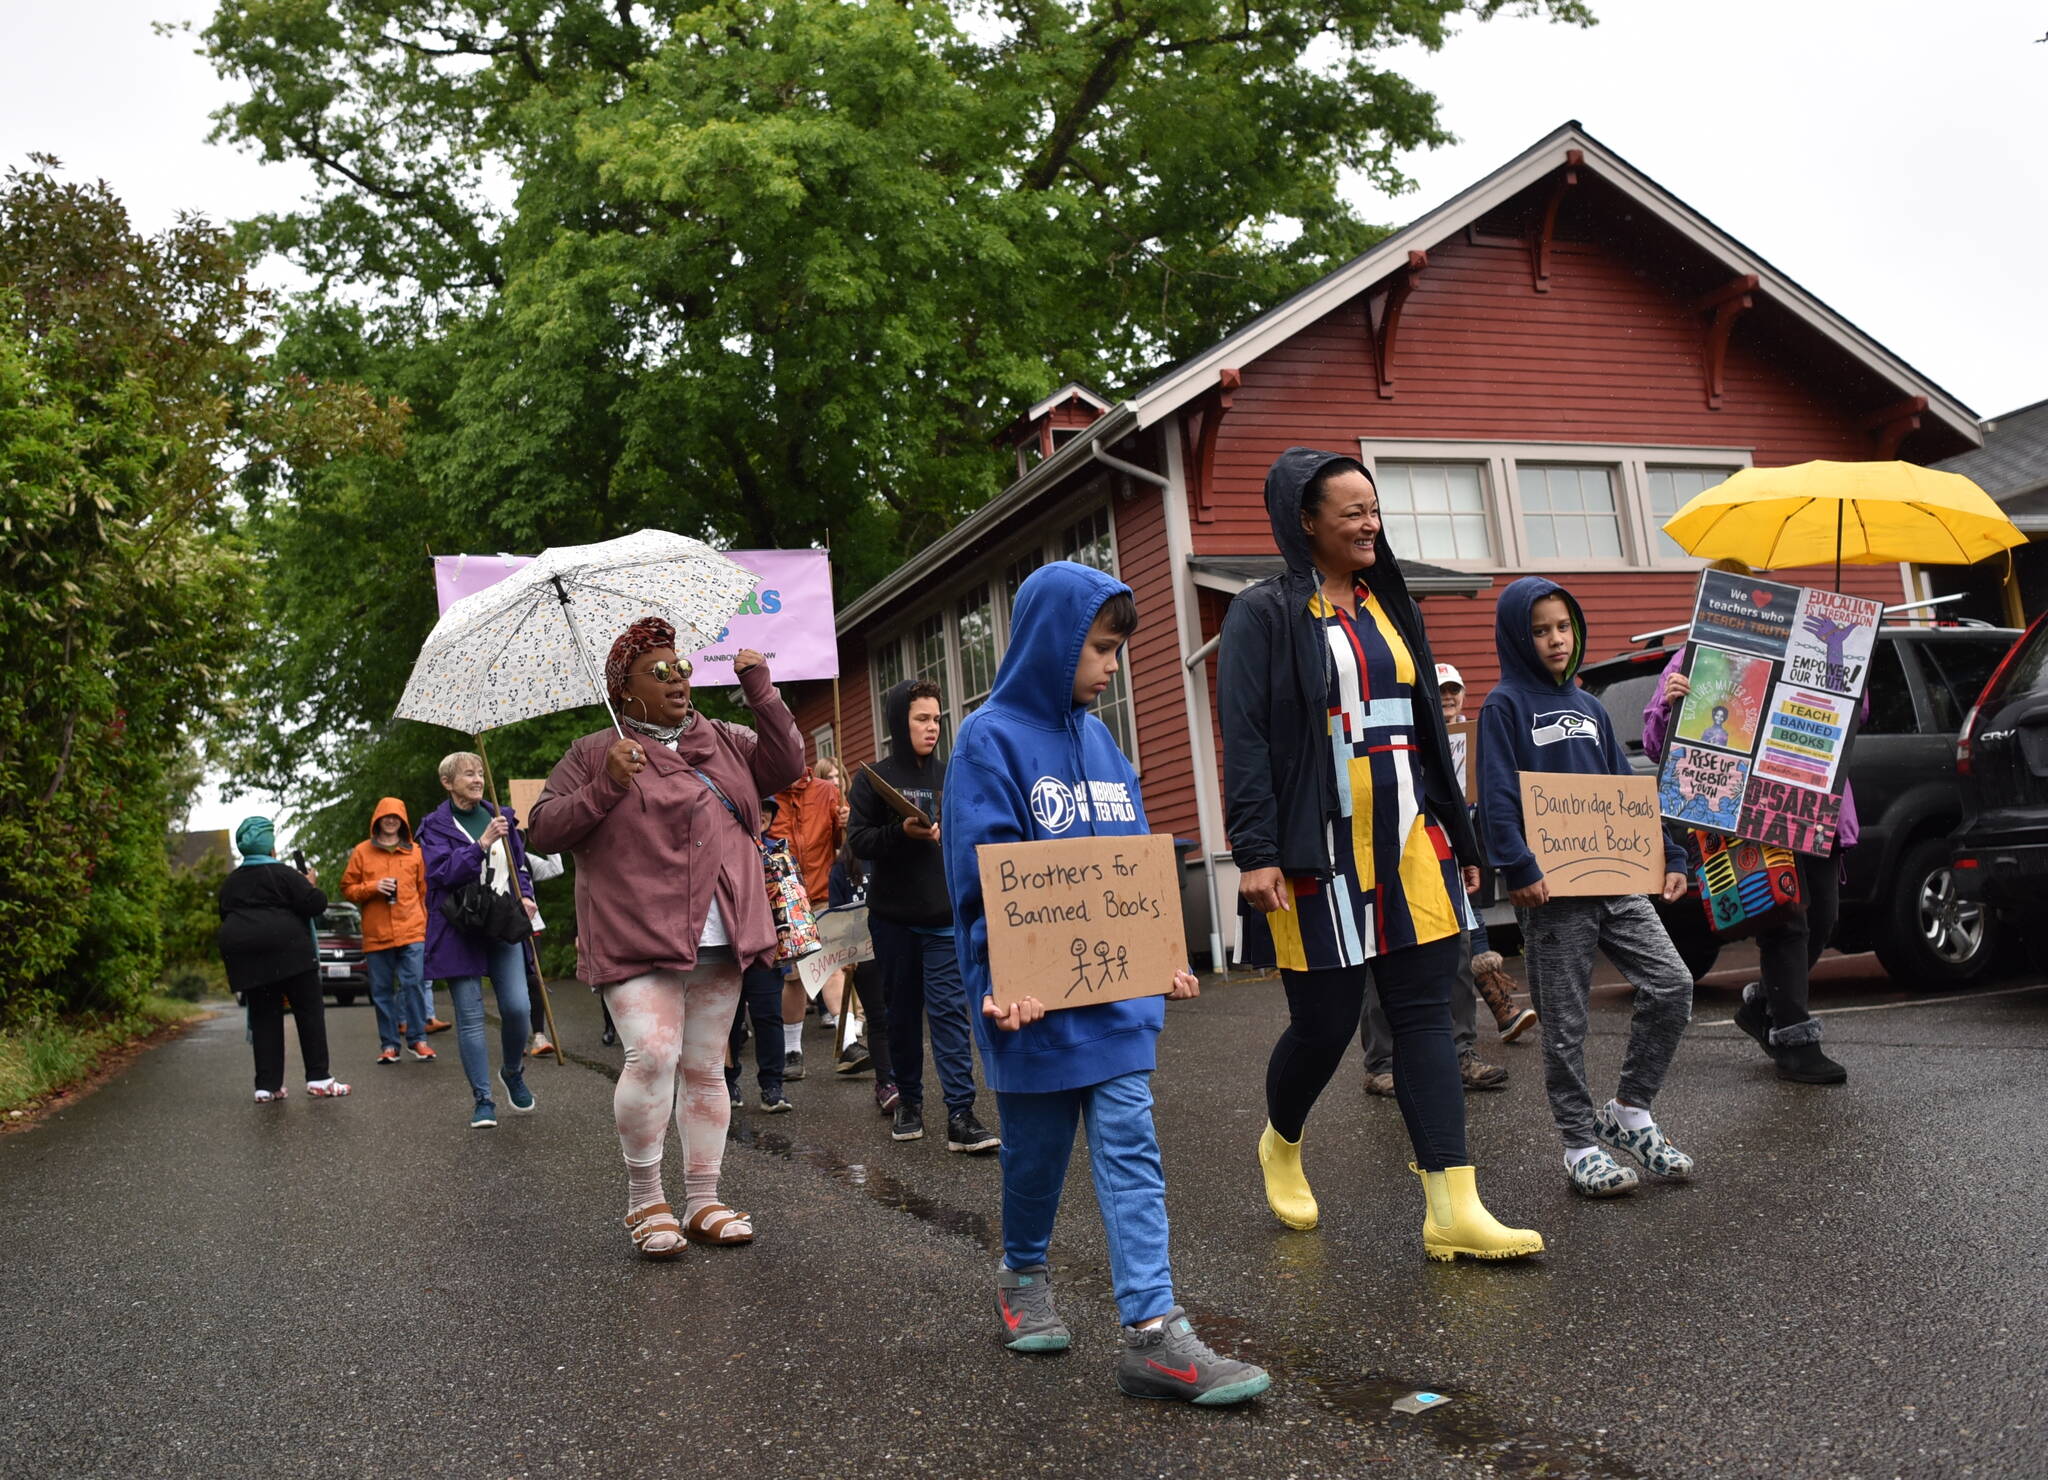 Community activists joined together for ‘Freedom to Learn’ events that included a protest march and panel discussion June 10 in Winslow. Nancy Treder/Kitsap News Group Photos